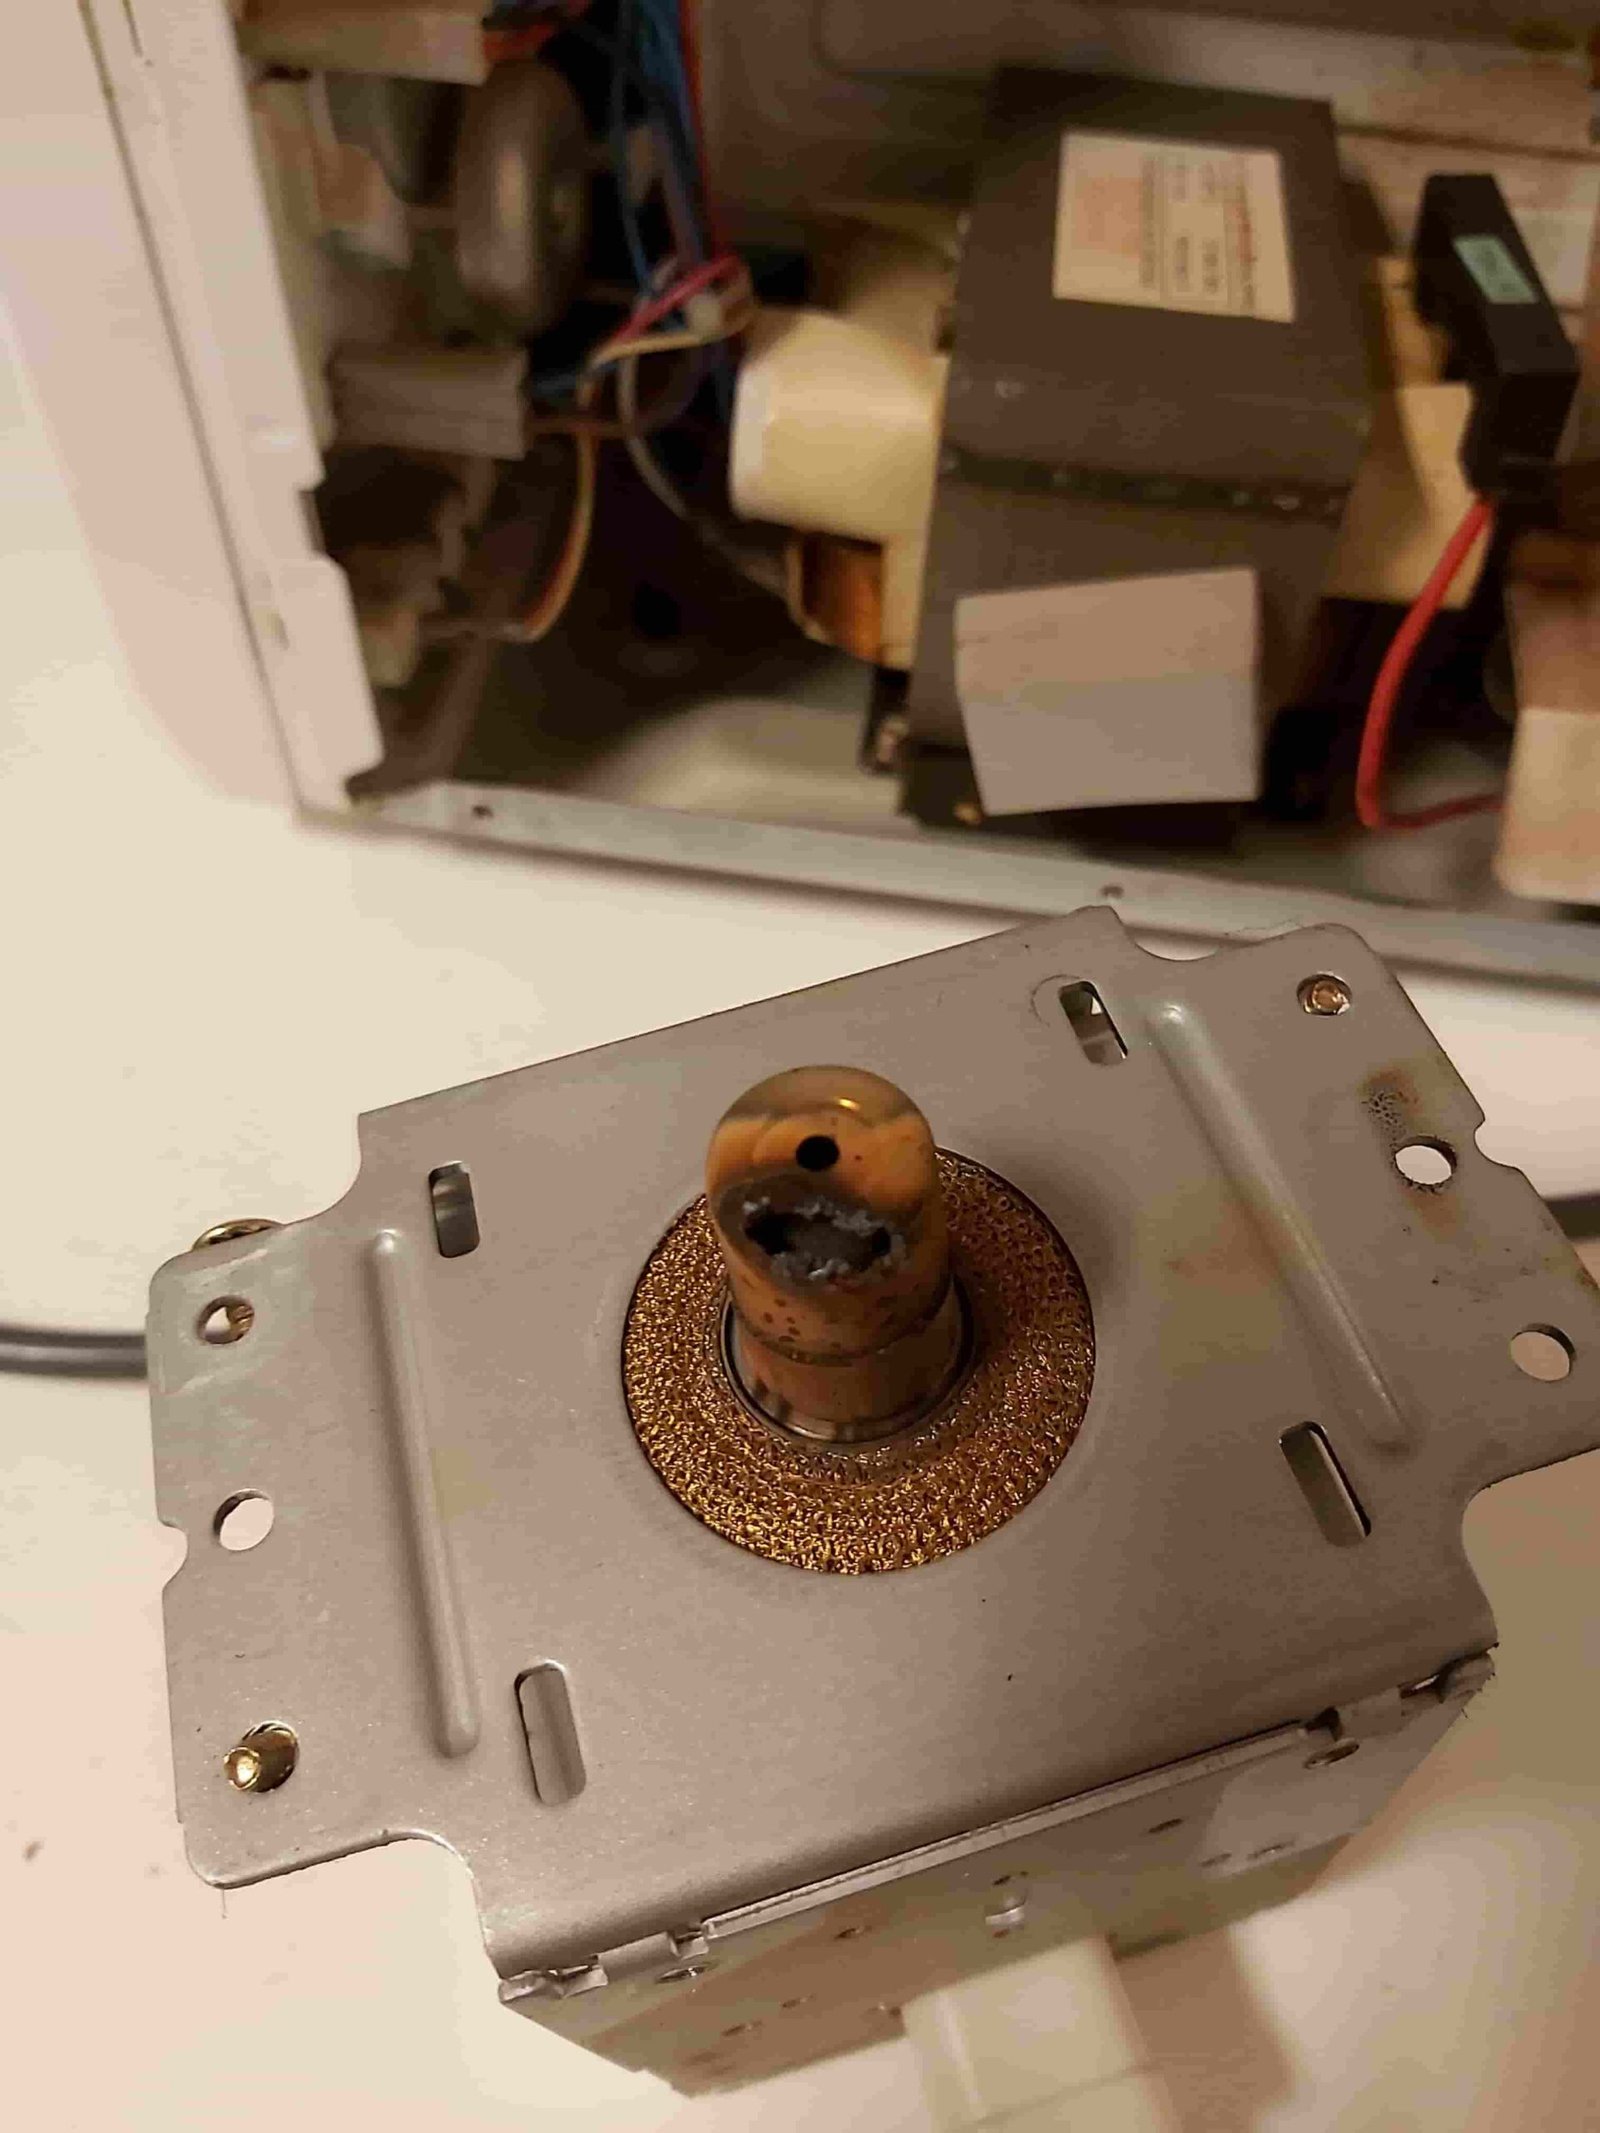  Image of Faulty Magnetron